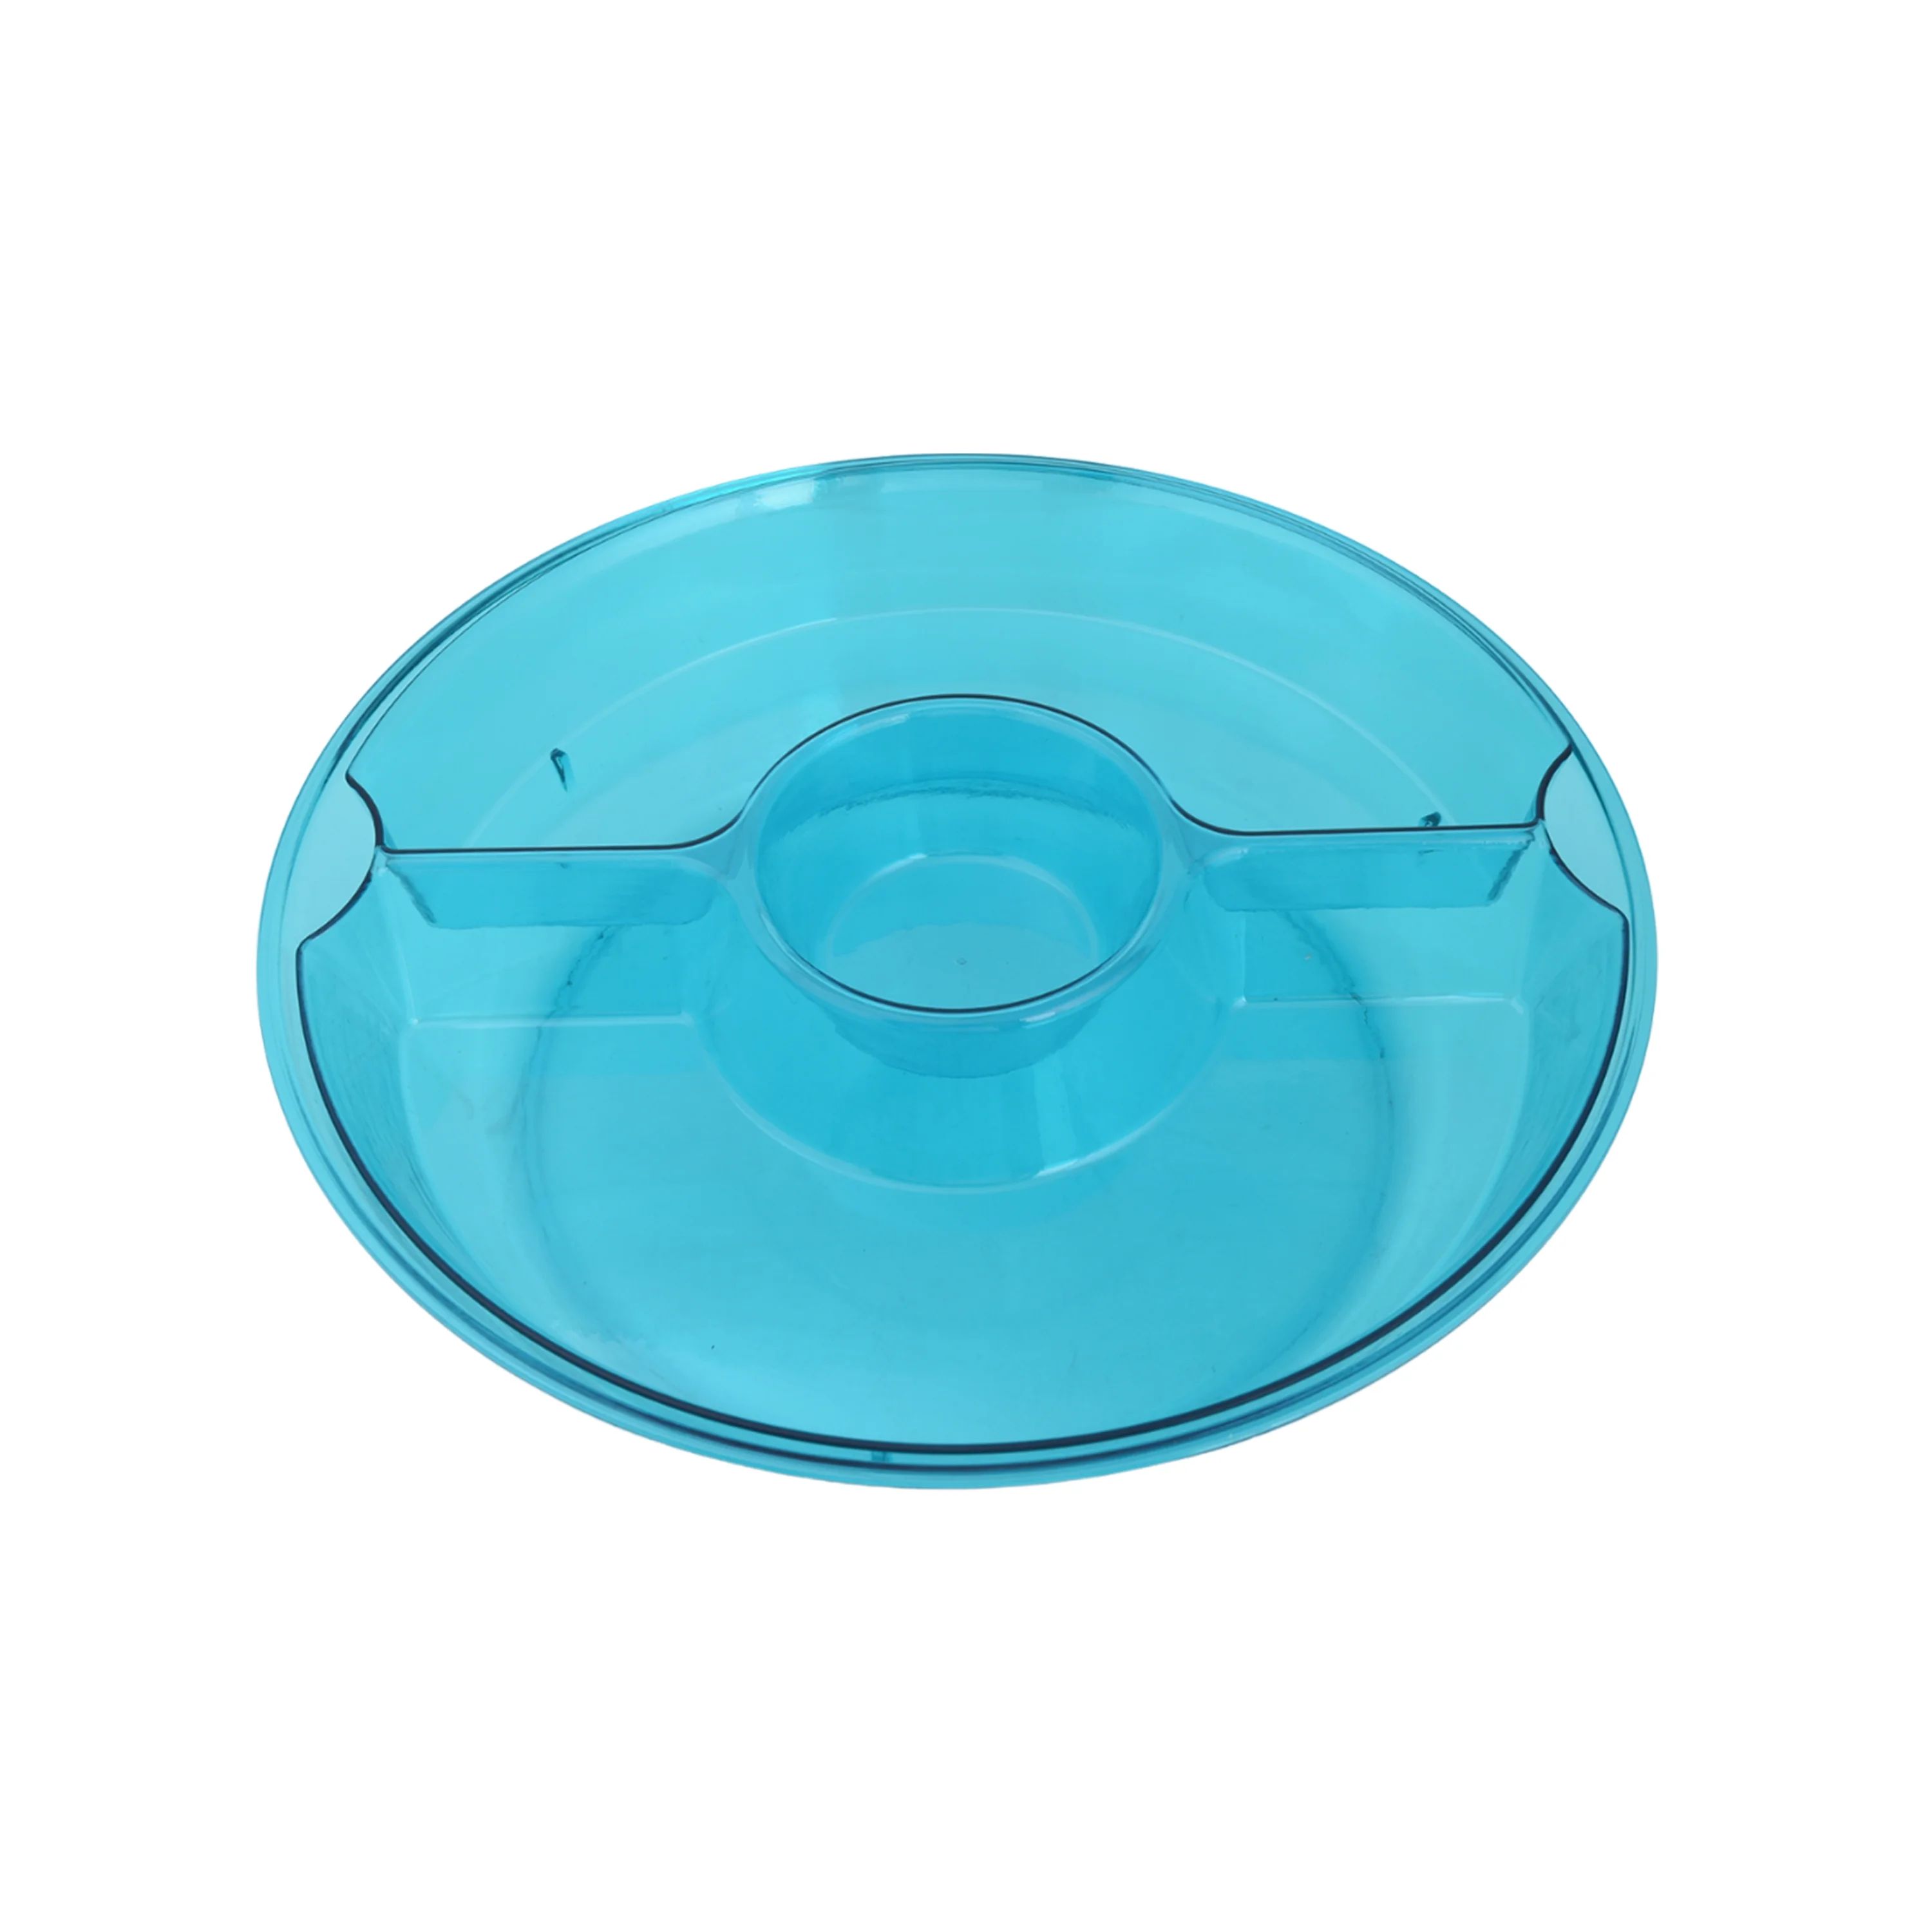 Mainstays Acrylic Appetizer On Ice Serving Tray with Lid, Blue | Walmart (US)